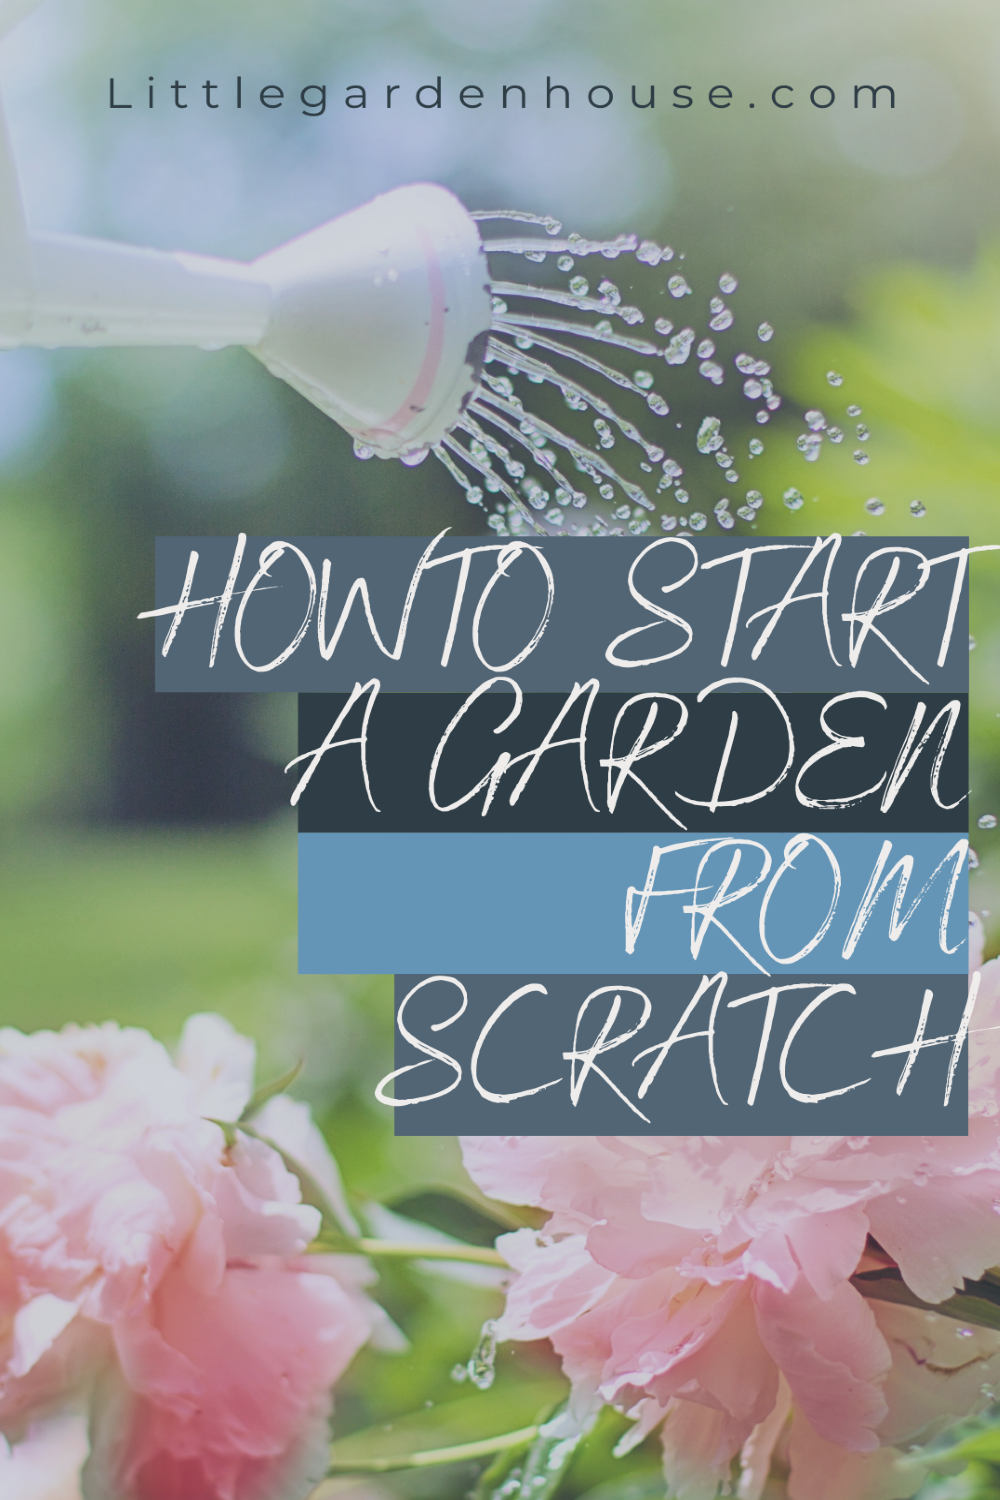 How to Start a Garden from scratch – 5 steps for Success